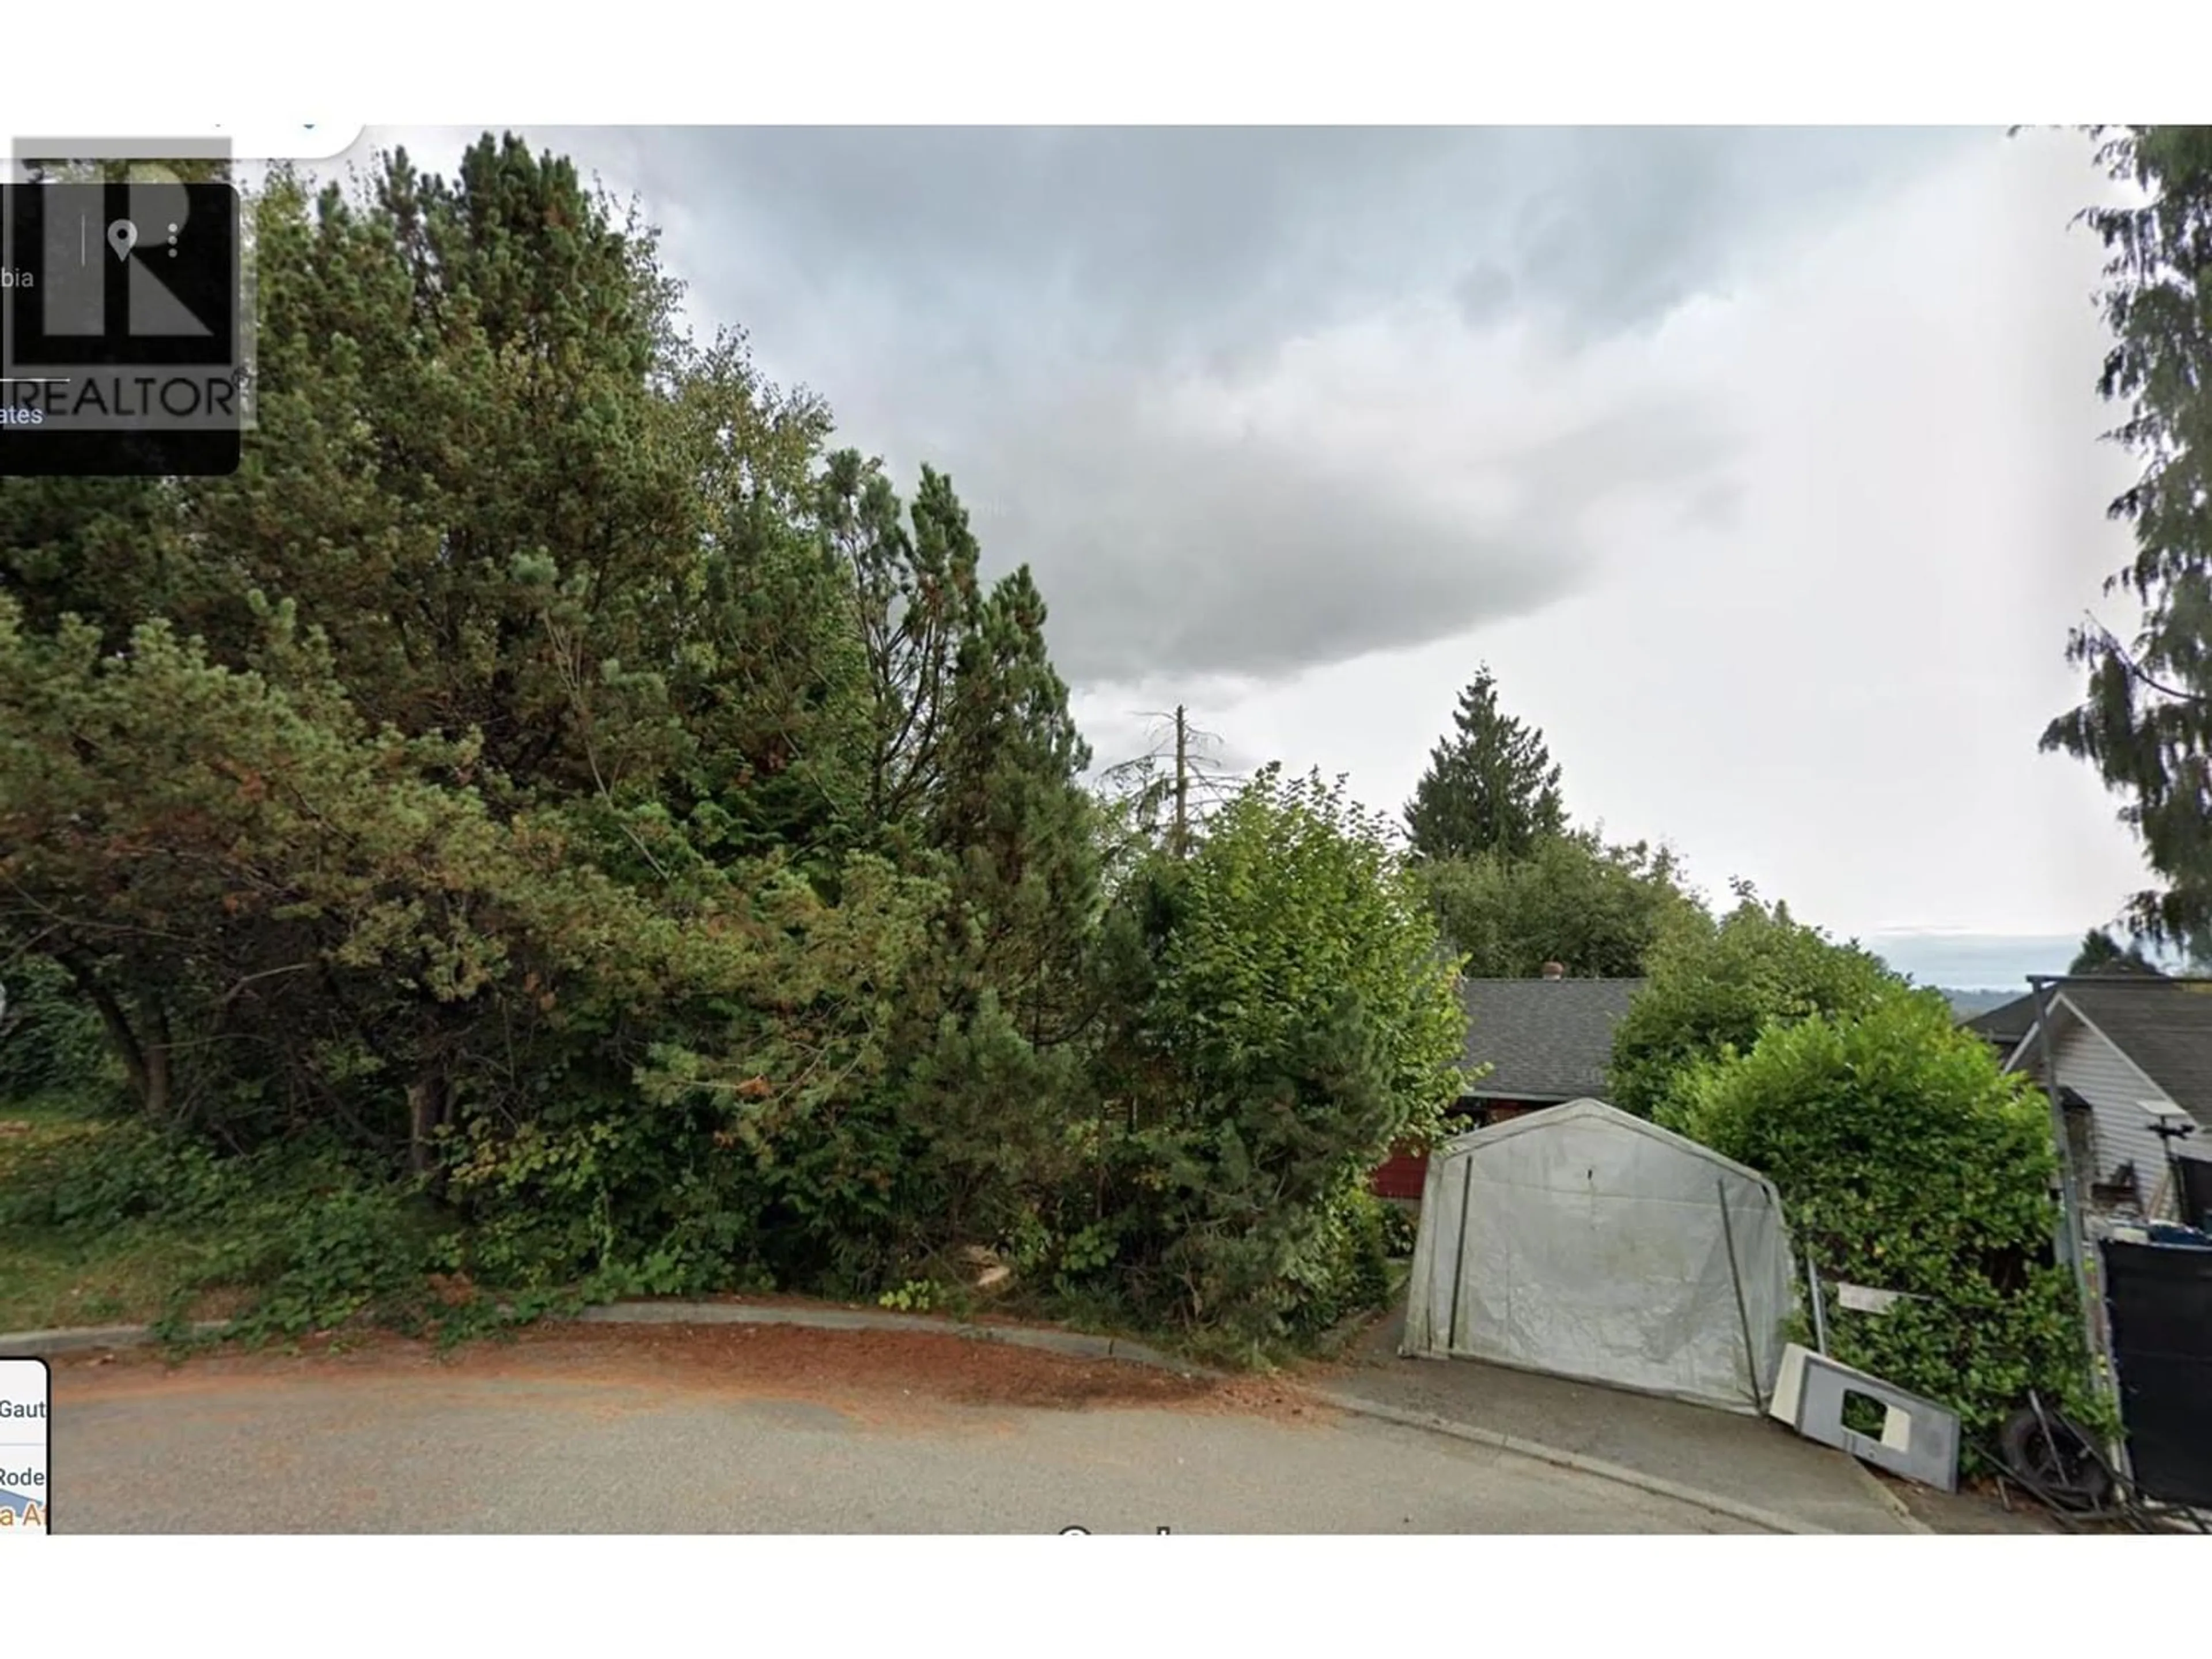 Street view for 716 GAUTHIER AVENUE, Coquitlam British Columbia V3K1R5